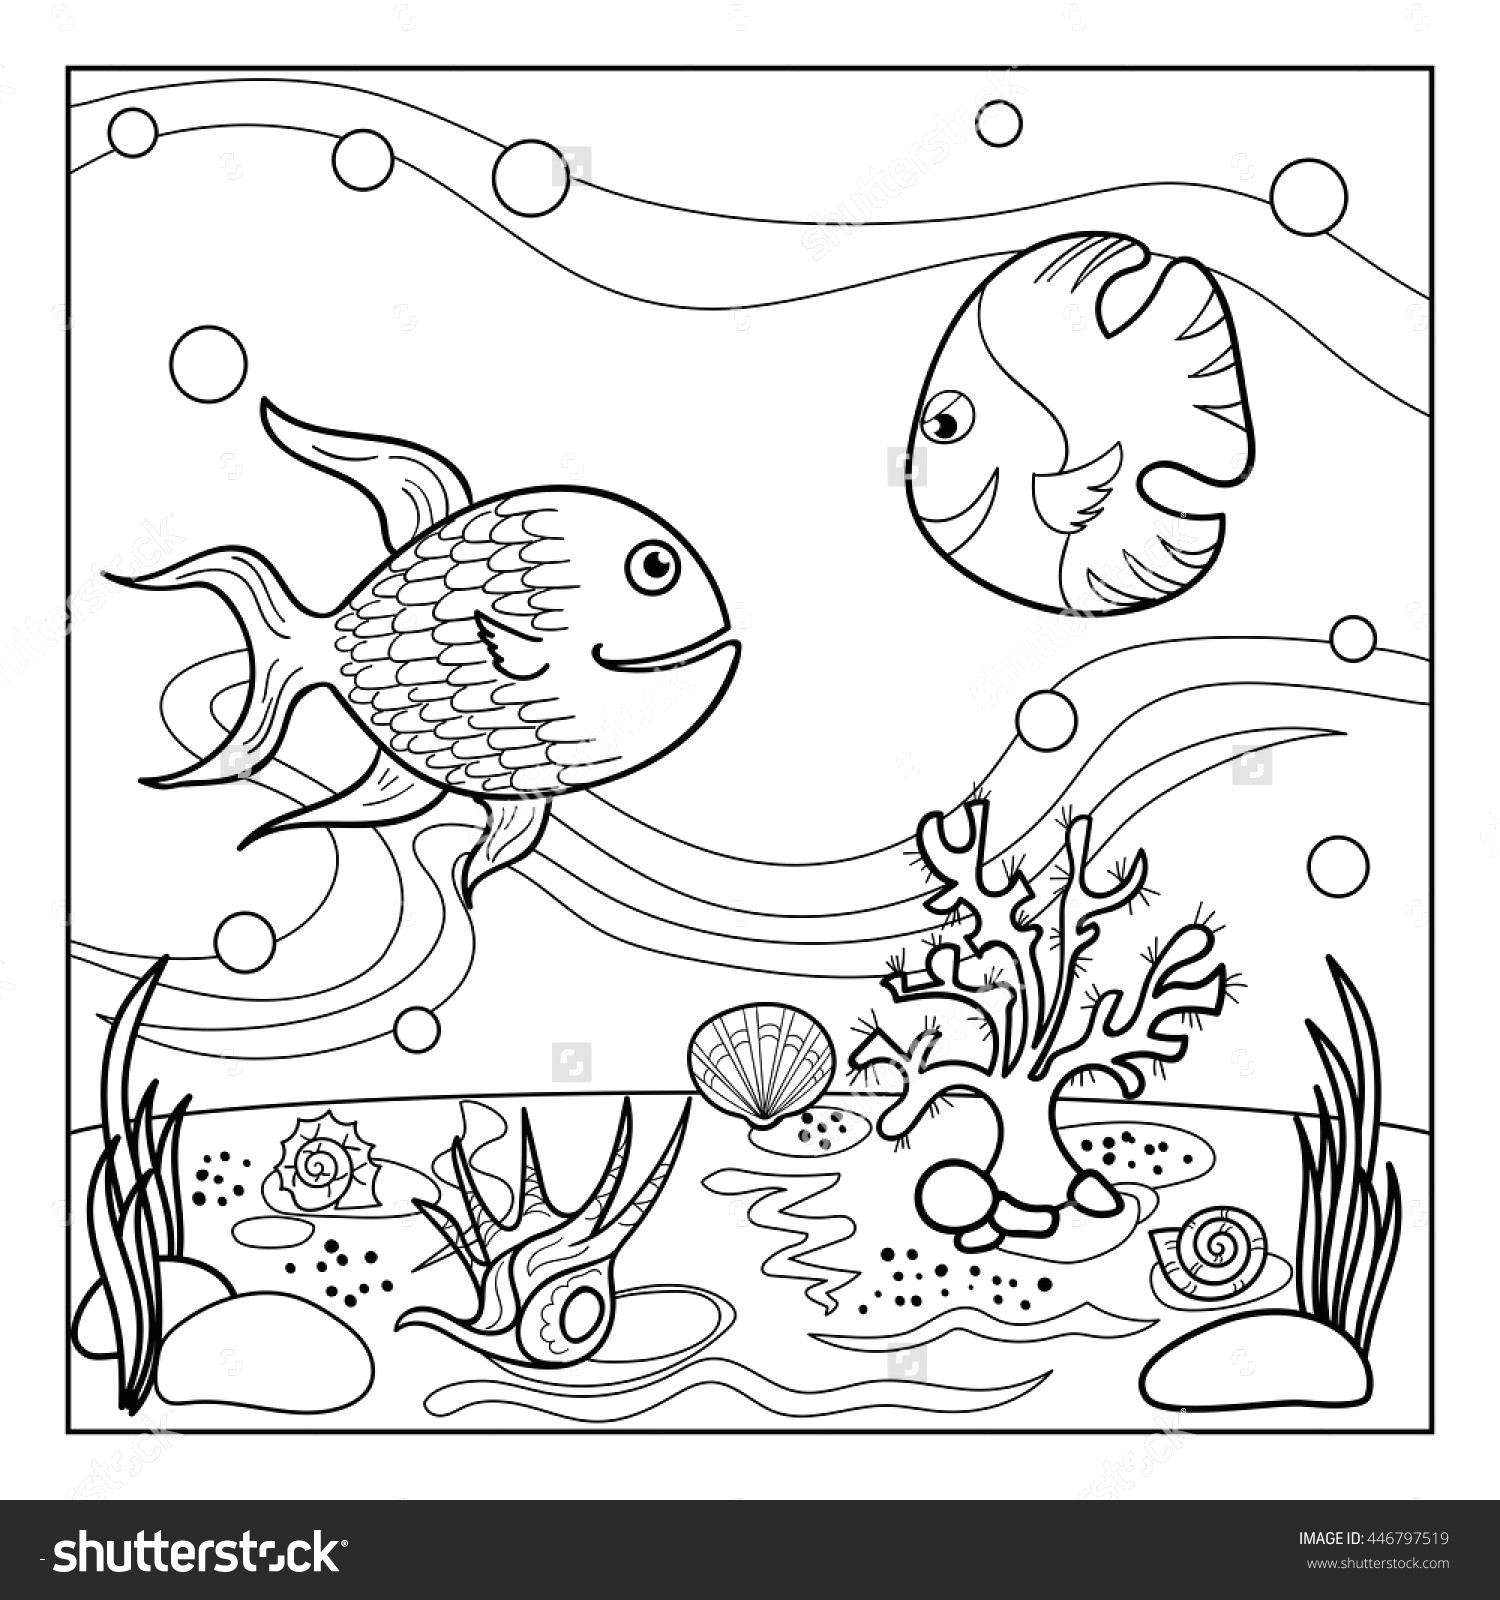 Easy Drawings with Color Easy to Draw Feather Feather Coloring Page Fresh Home Coloring Pages